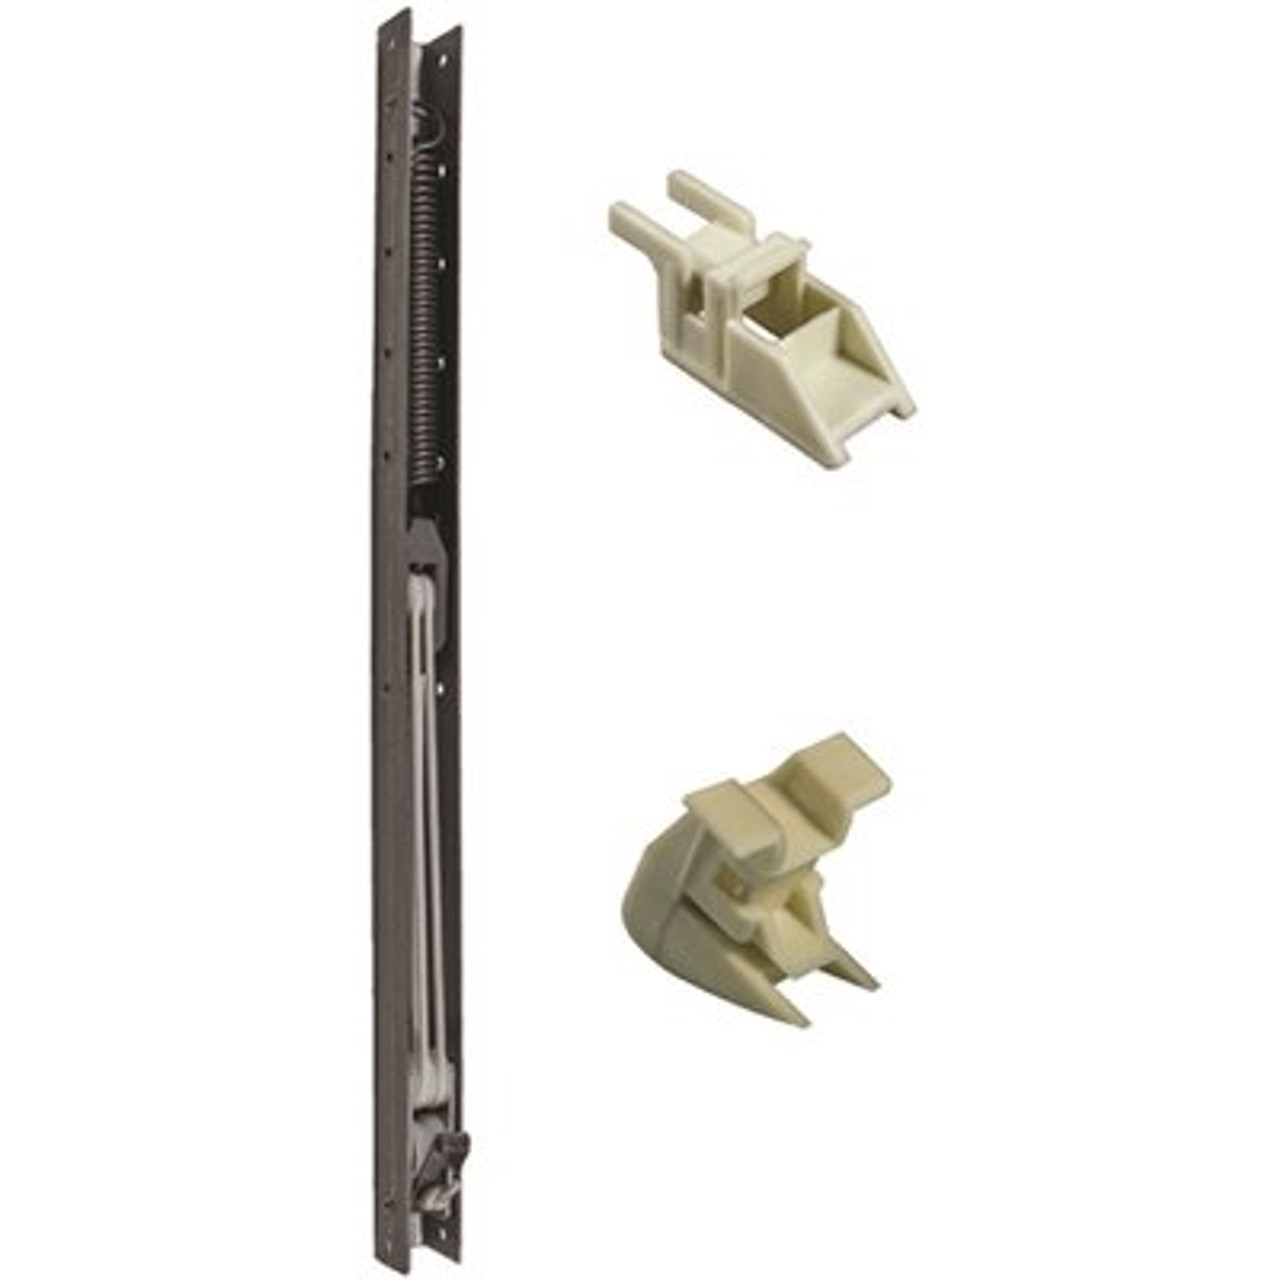 25 in. L Window Channel Balance 2430 with Top and Bottom End Brackets Attached 9/16 in. W x 5/8 in. D ( Pack of 10 )